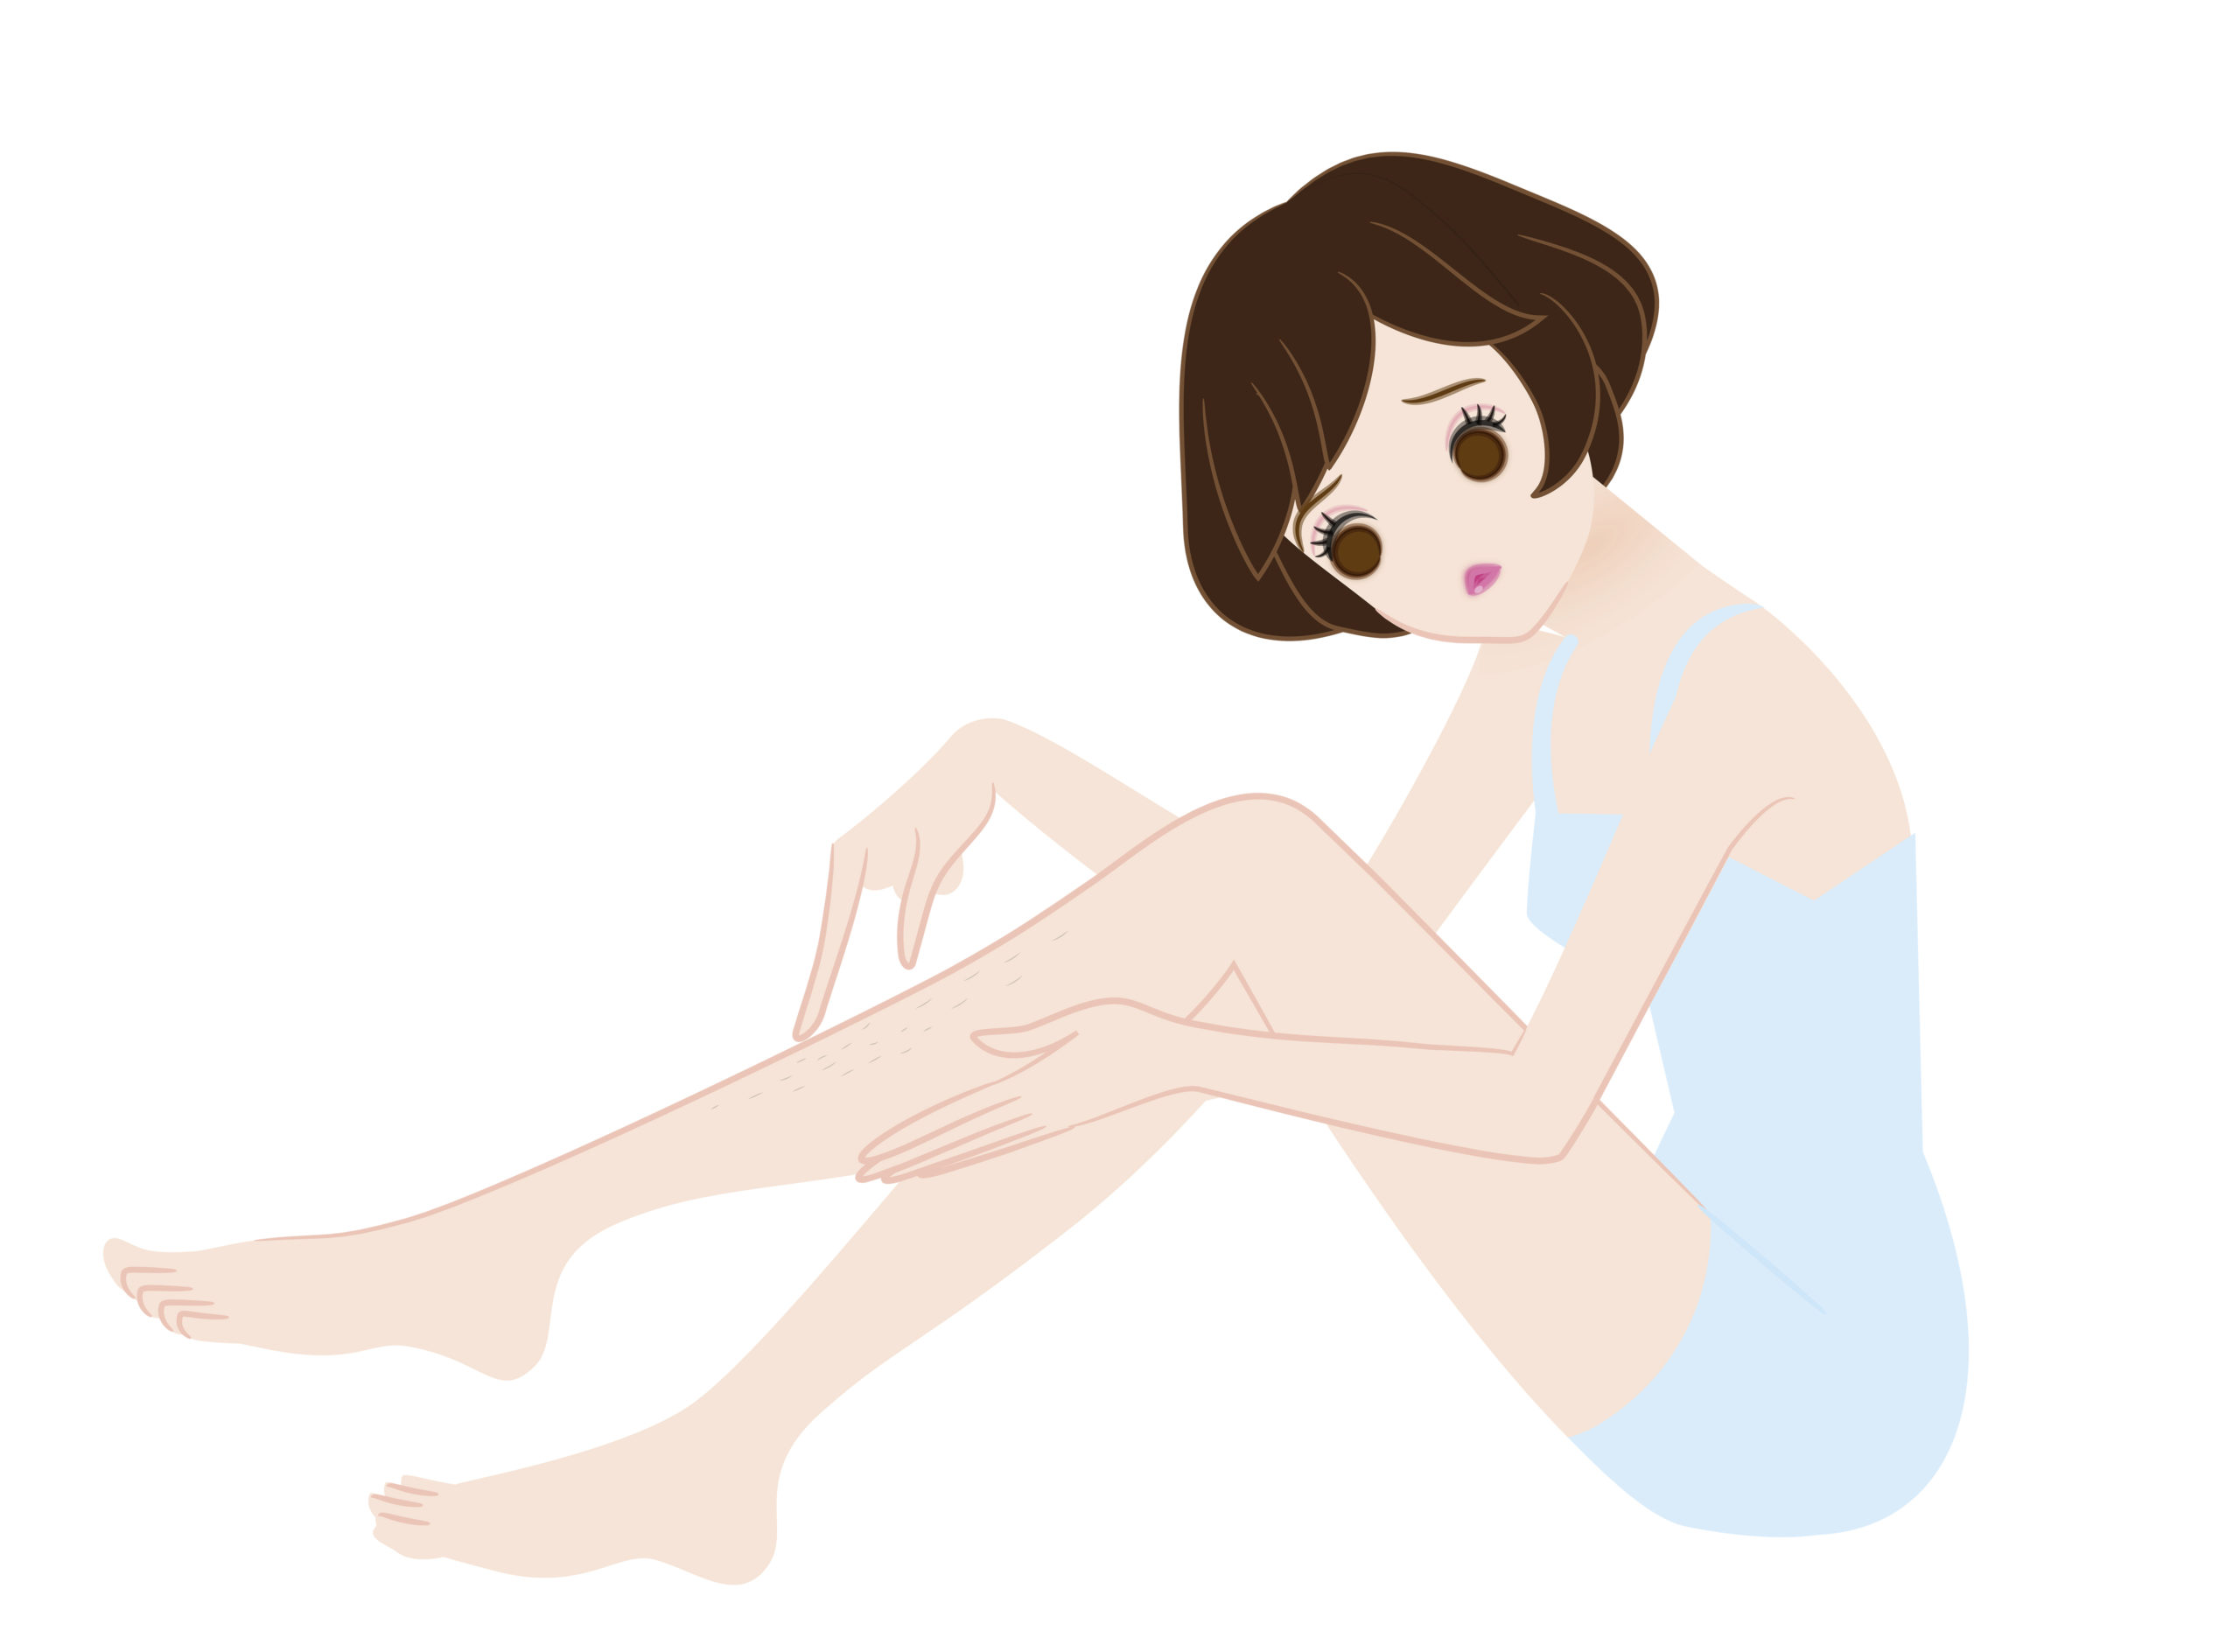 Things to consider about IPL hair removal